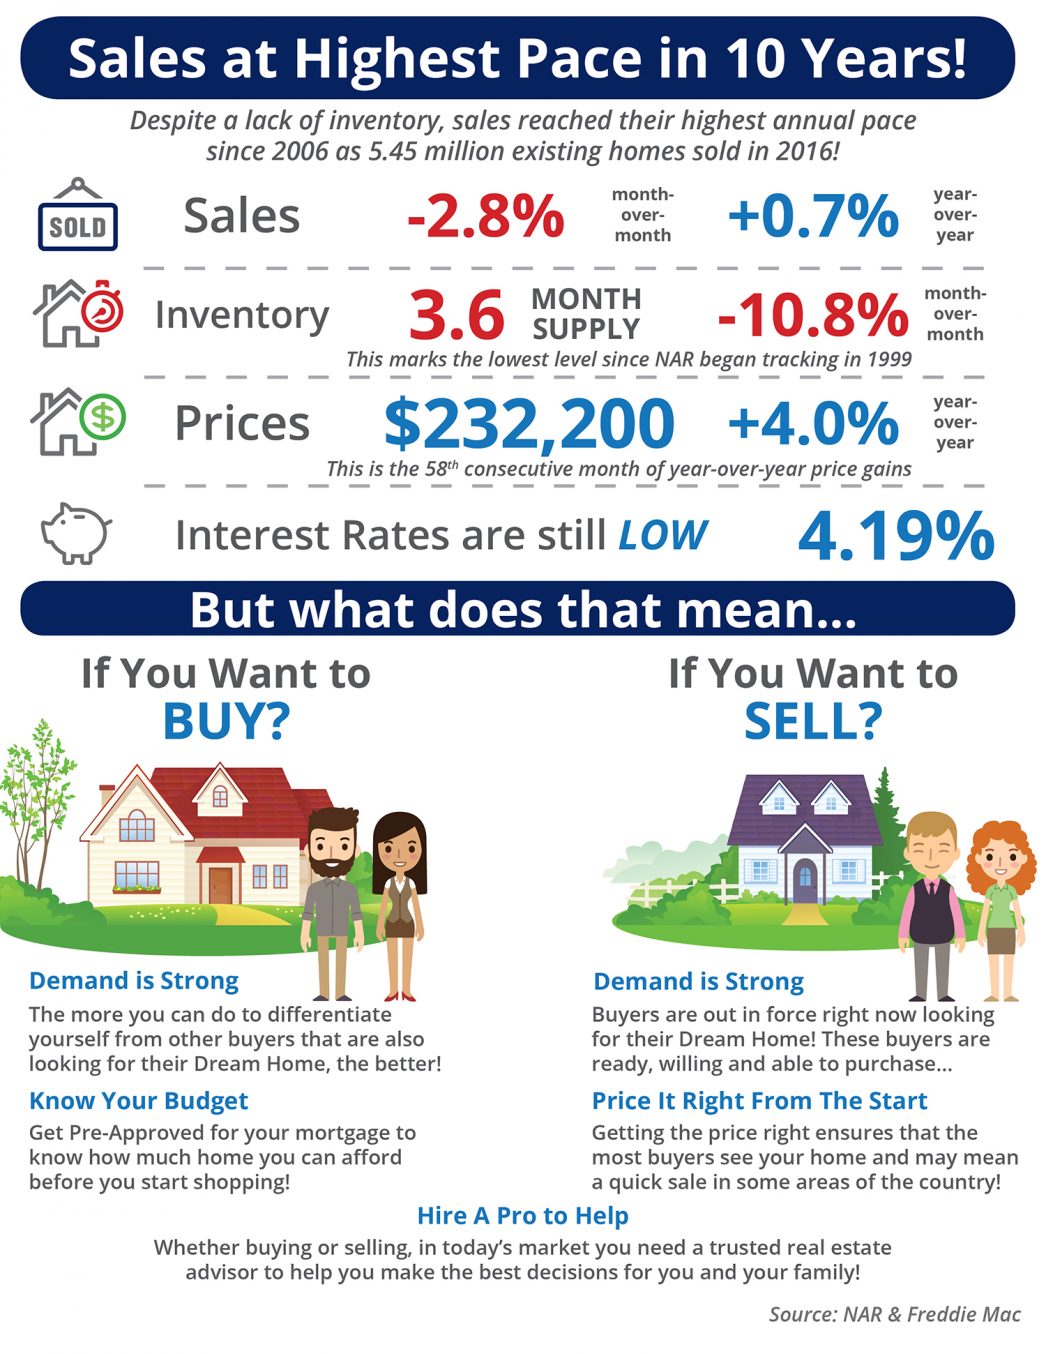 Sales at Highest Pace in 10 Years! [INFOGRAPHIC] | MyKCM